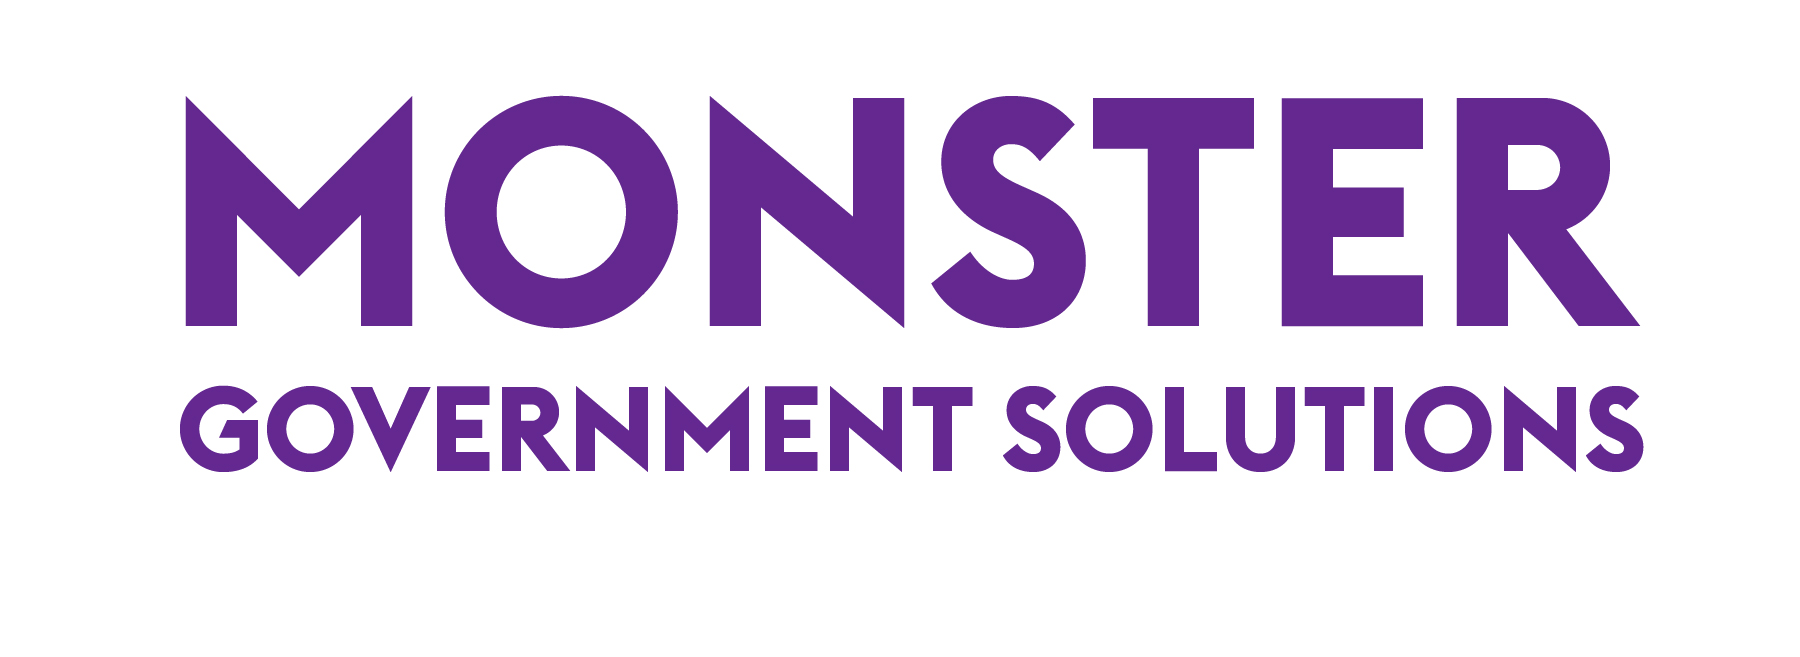 Monster Government Solutions's logo